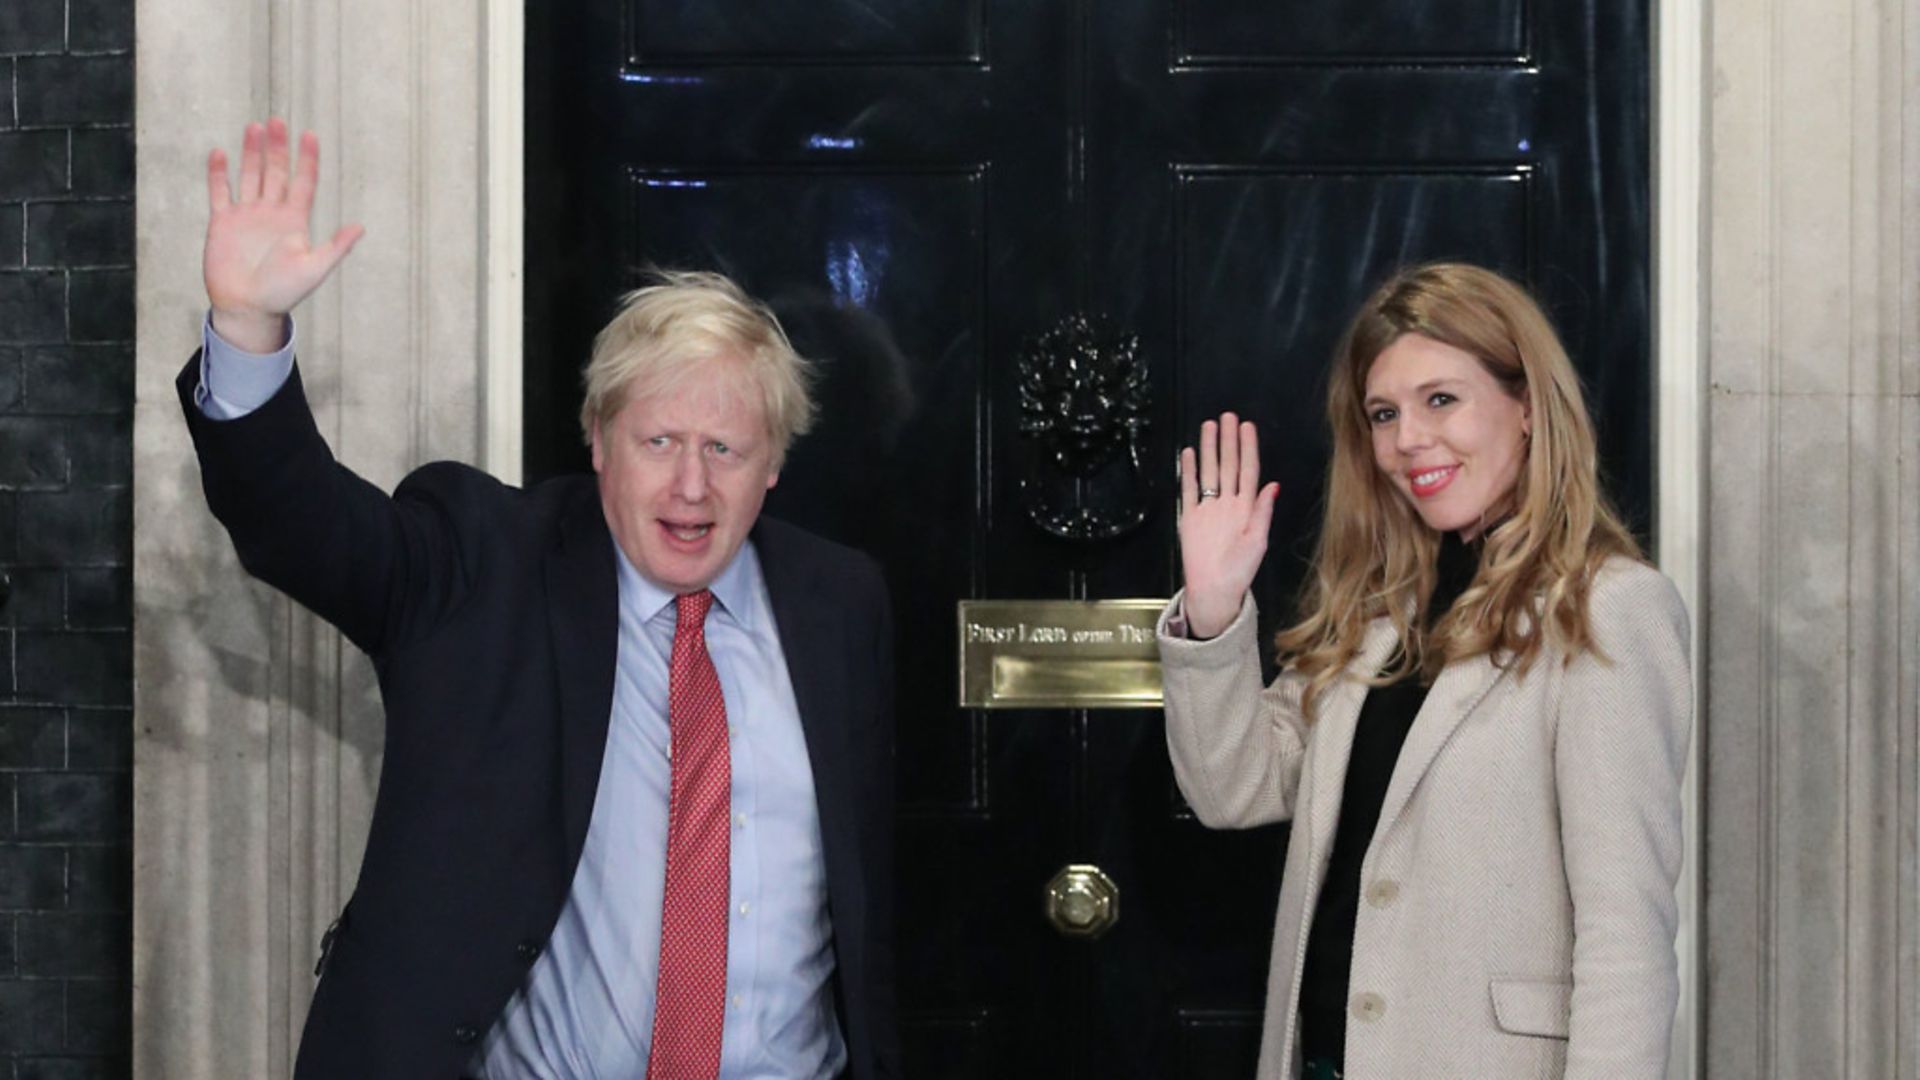 Prime minister Boris Johnson with fiancée Carrie Symonds outside No 10 - Credit: PA